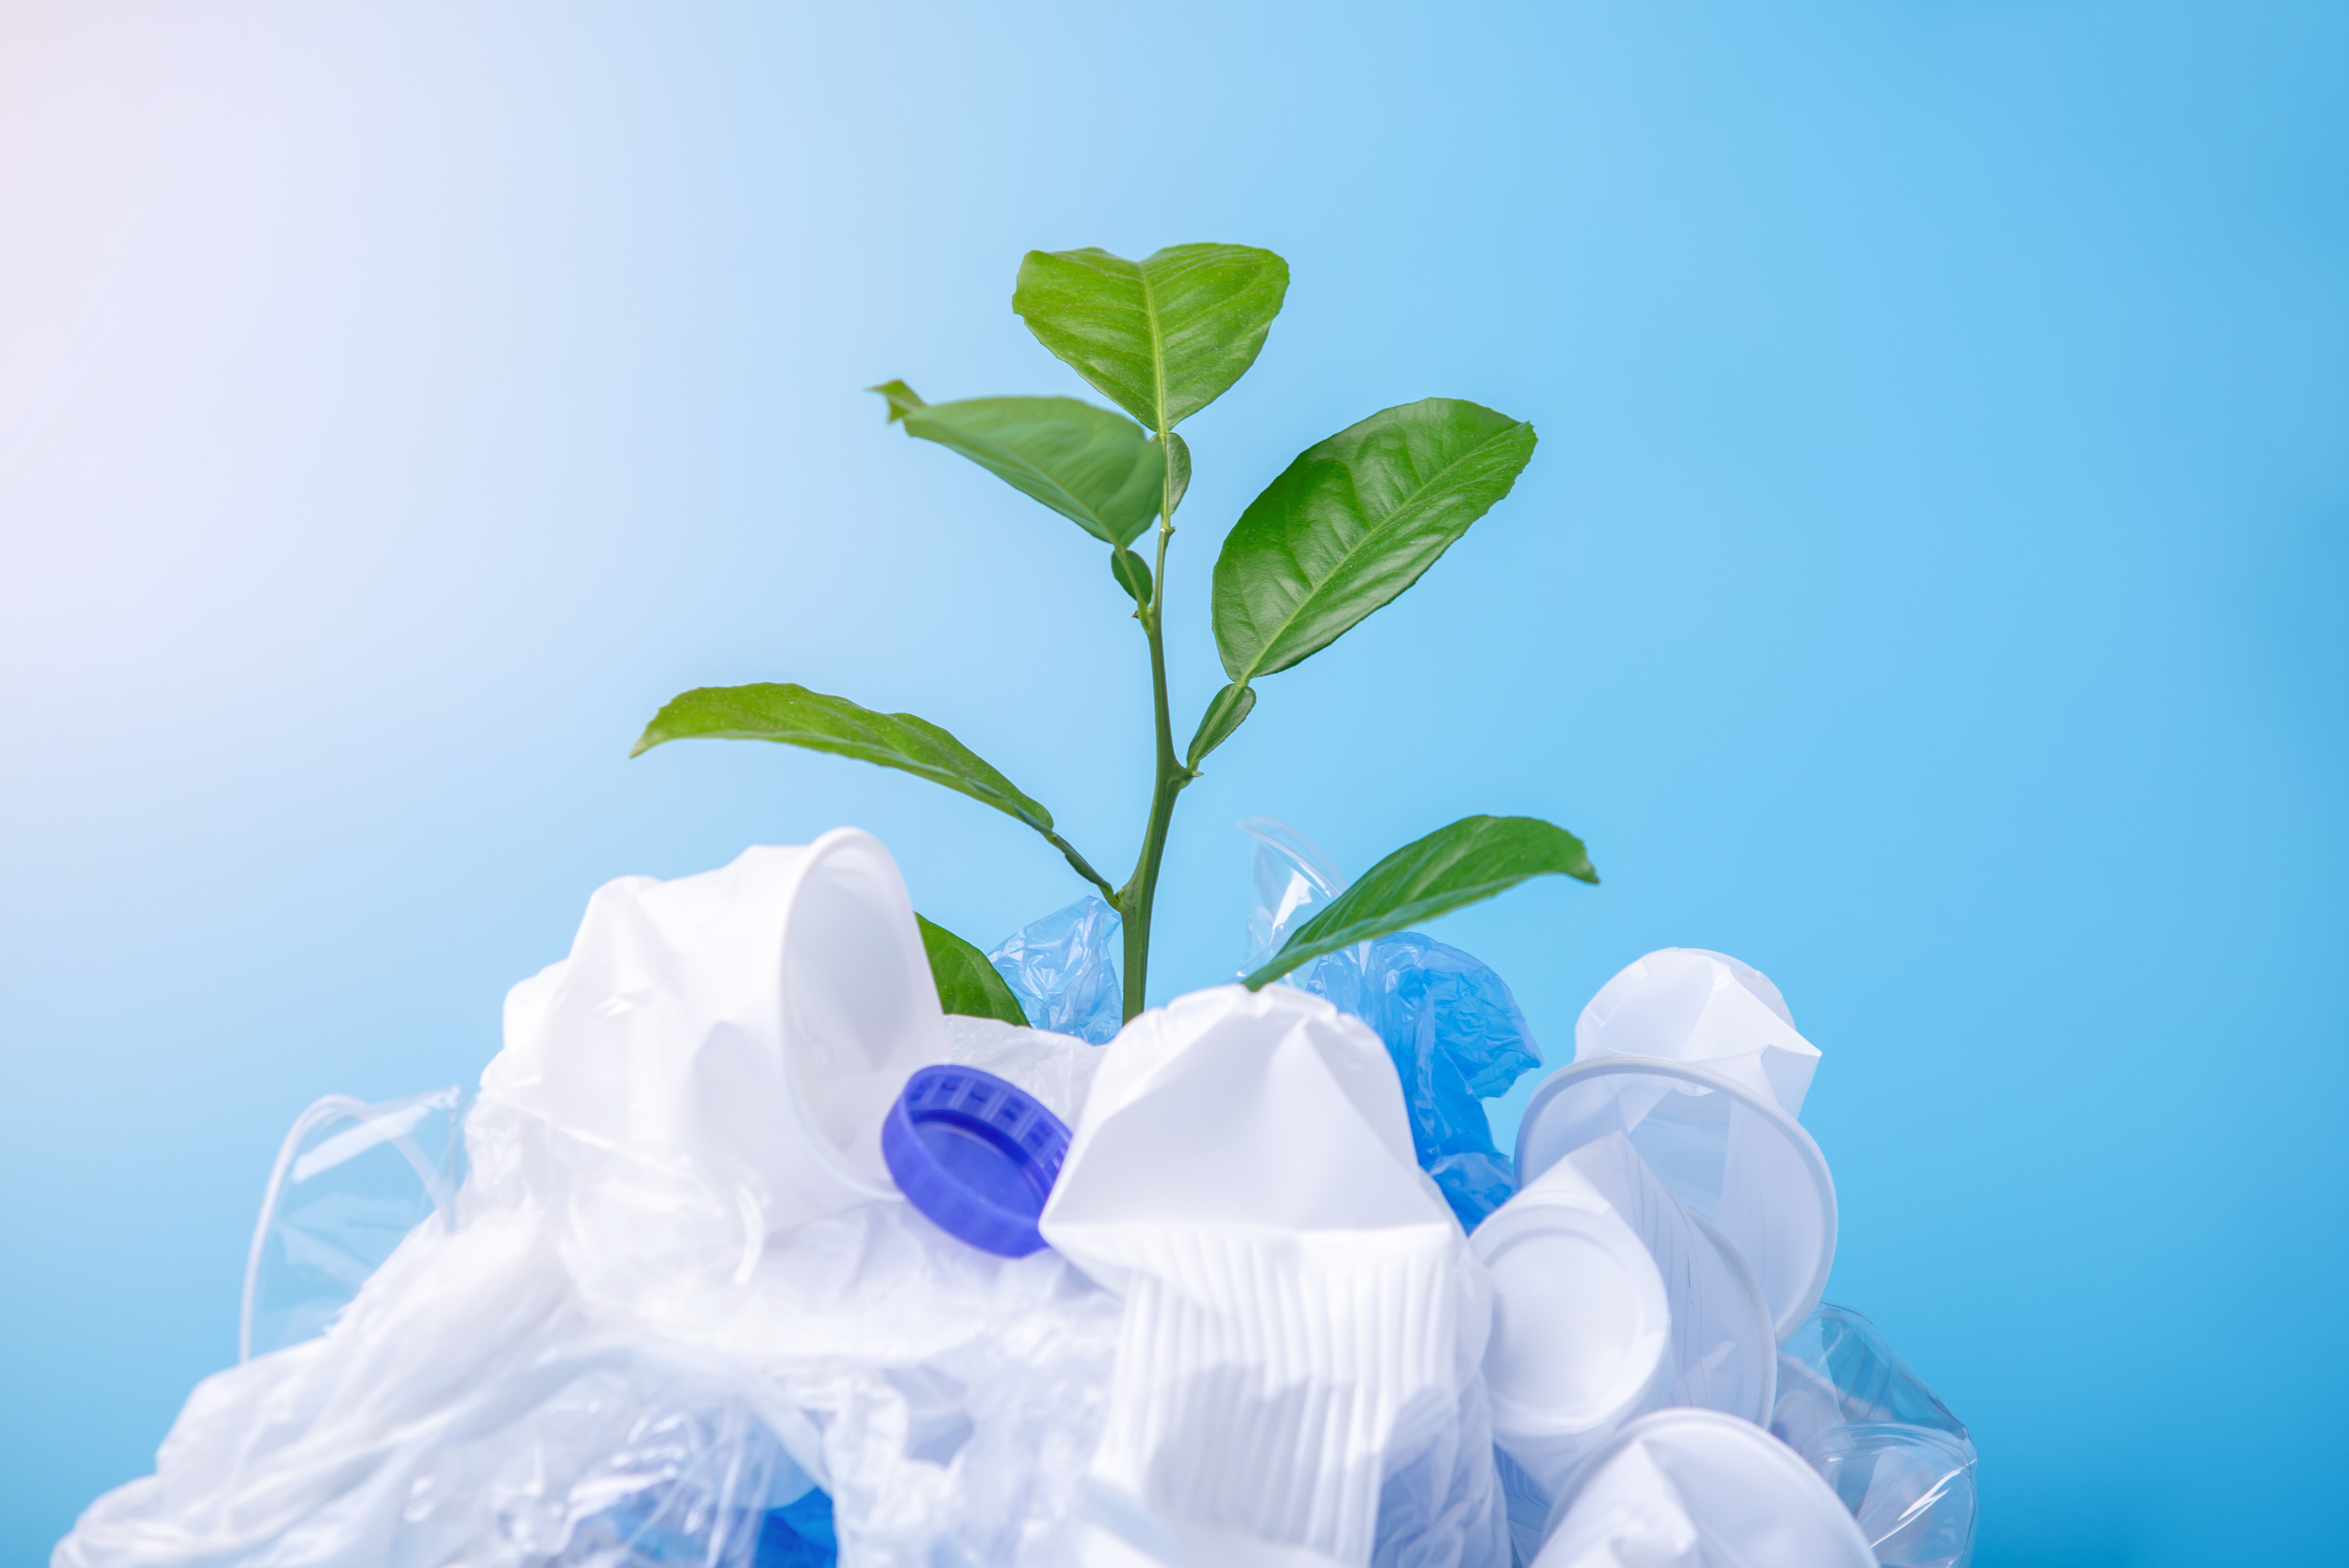 Green plant grows among plastic garbage. Bottles and bags on blue background. Concept of environmental protection and waste sorting.